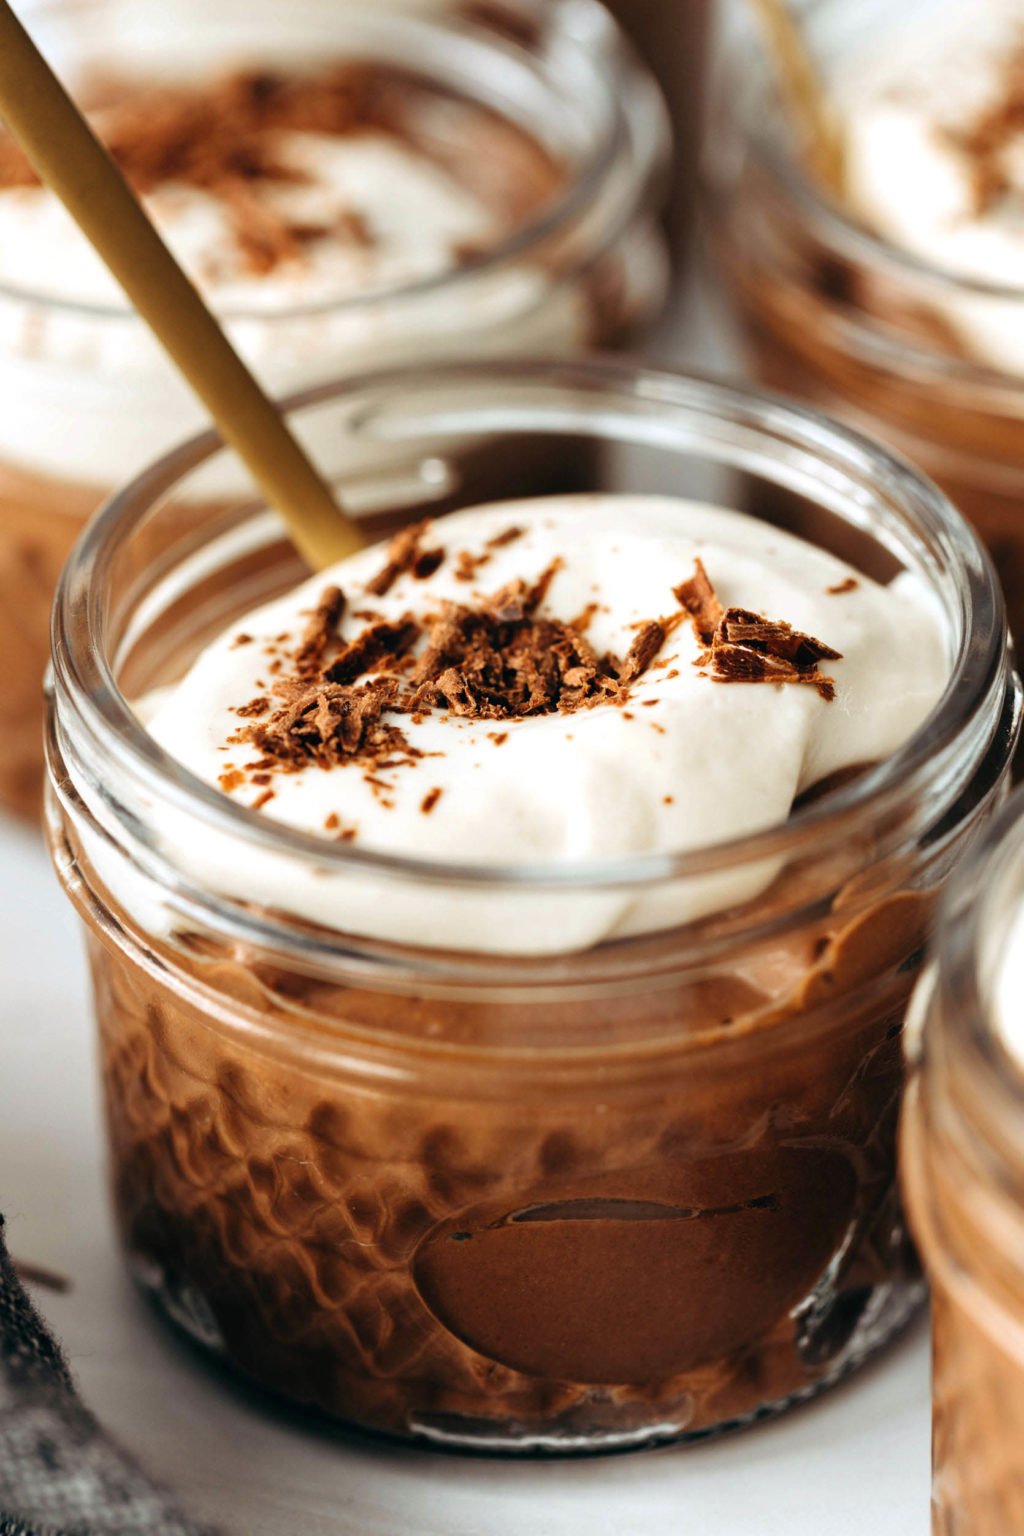 A few small mason jars are filled with chocolate pudding and tofu whipped cream. A spoon peeks out from one of them.